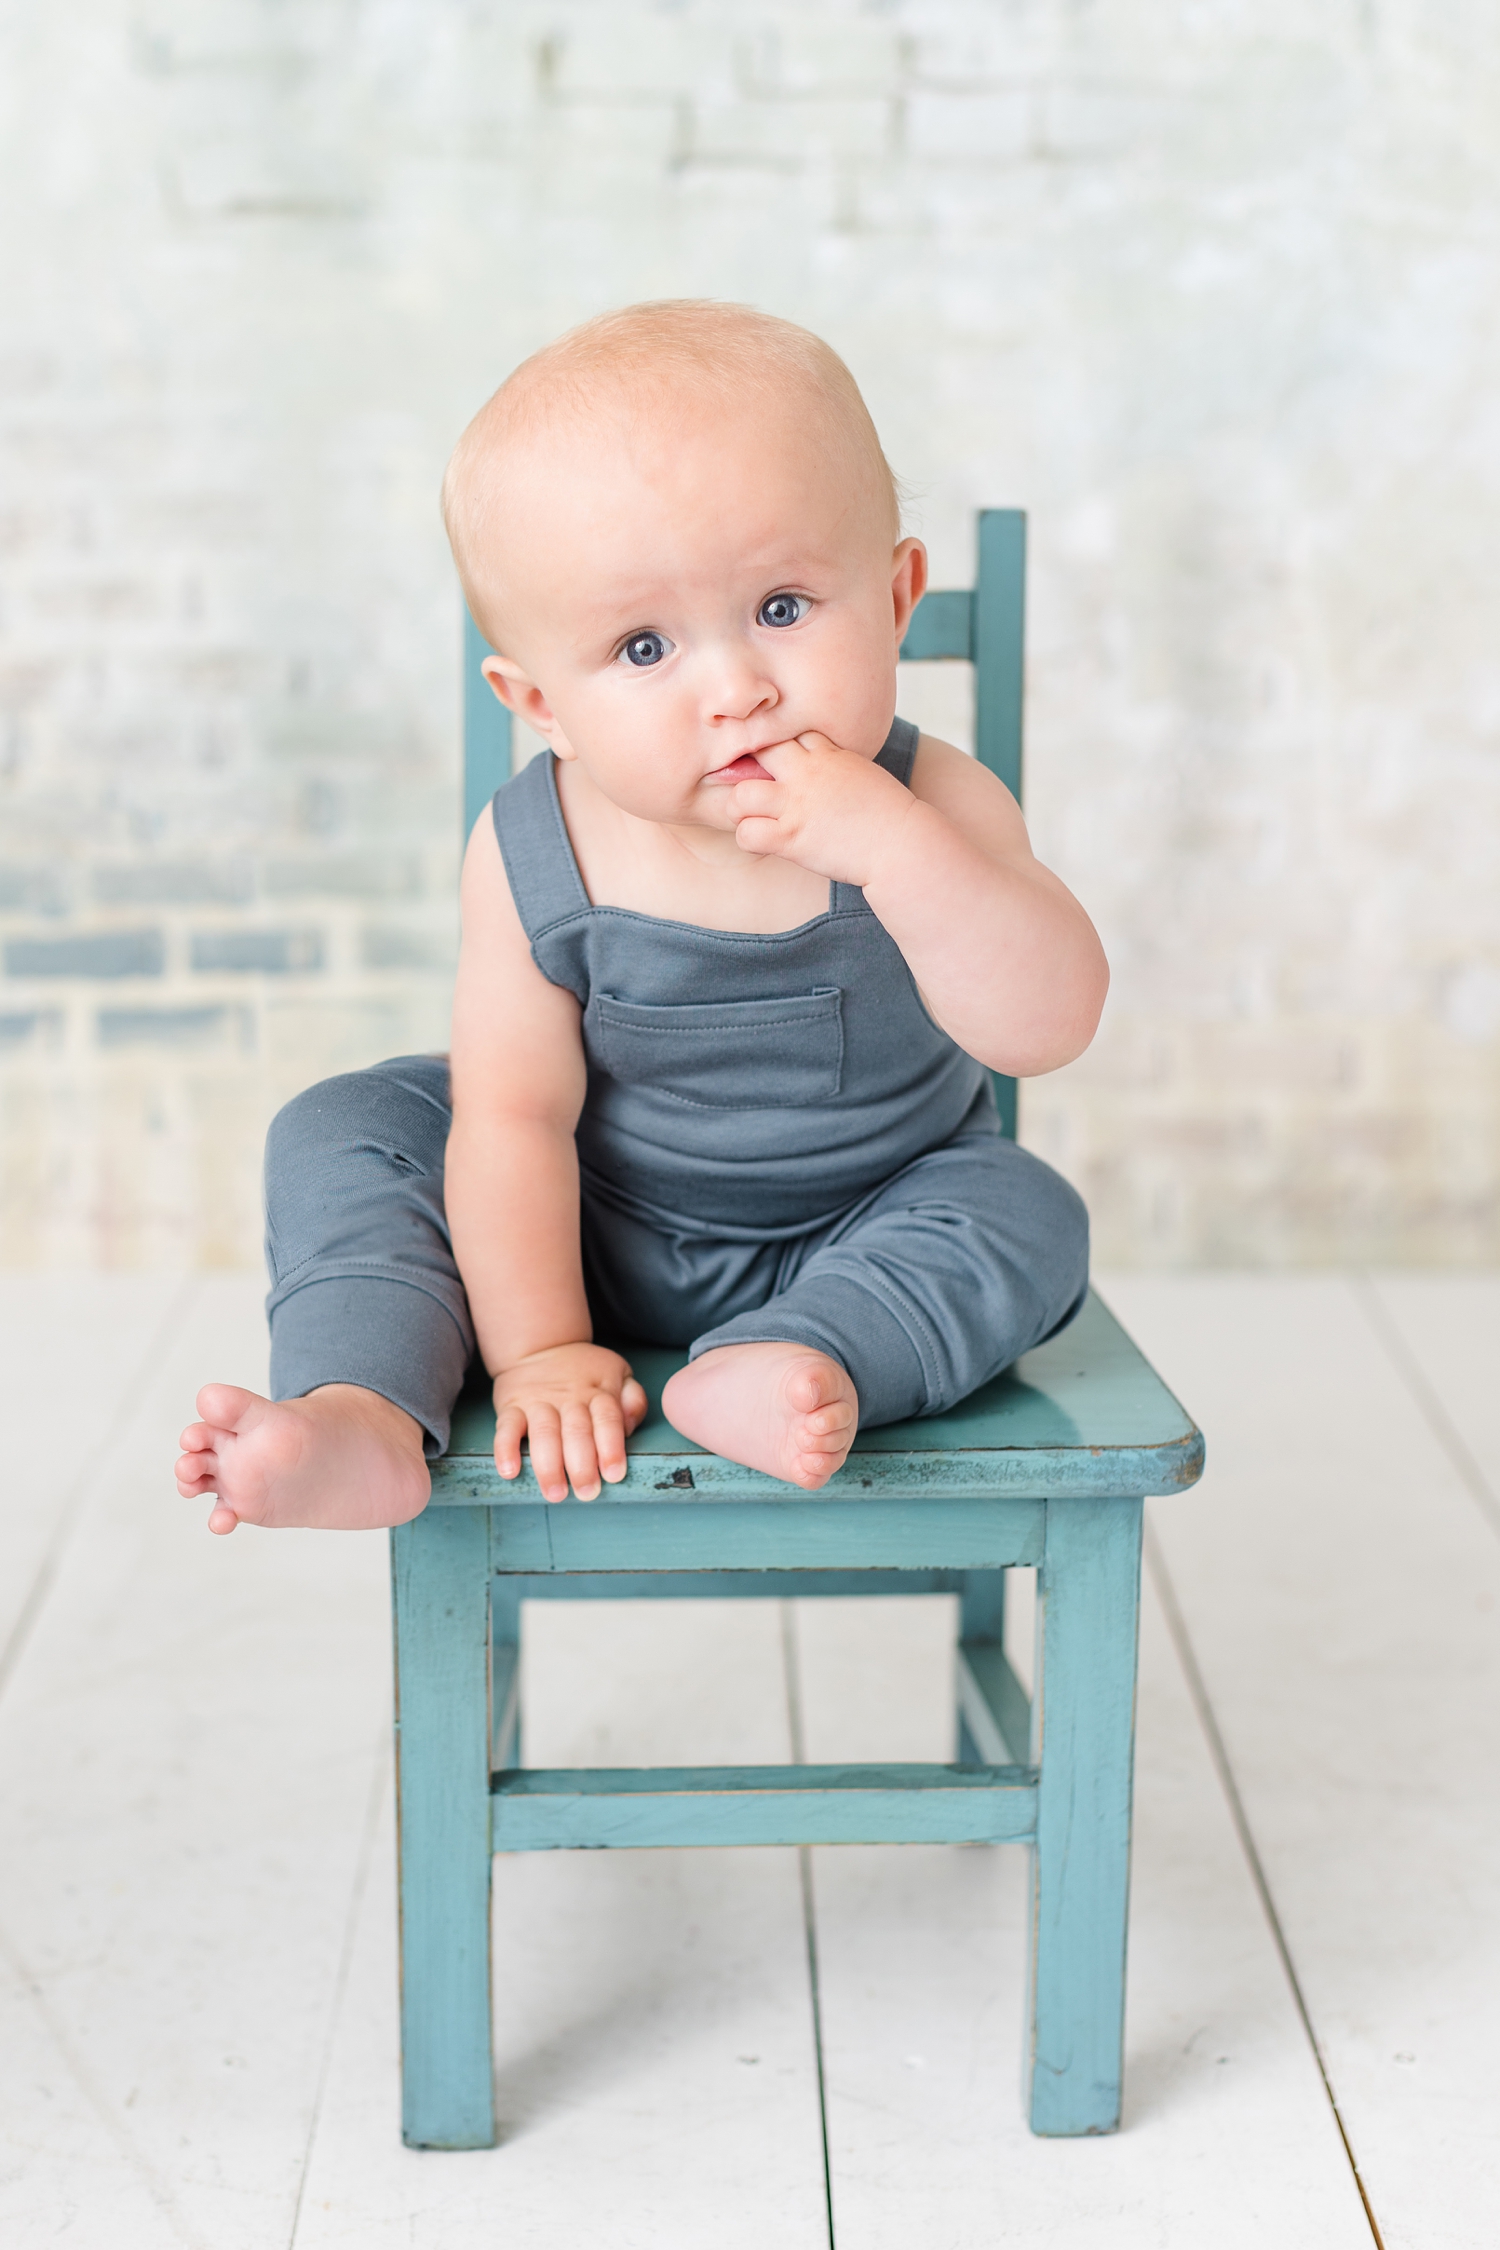 Baby Hudsyn sits in a blue chair wearing blue overalls, sucking on his fingers | CB Studio